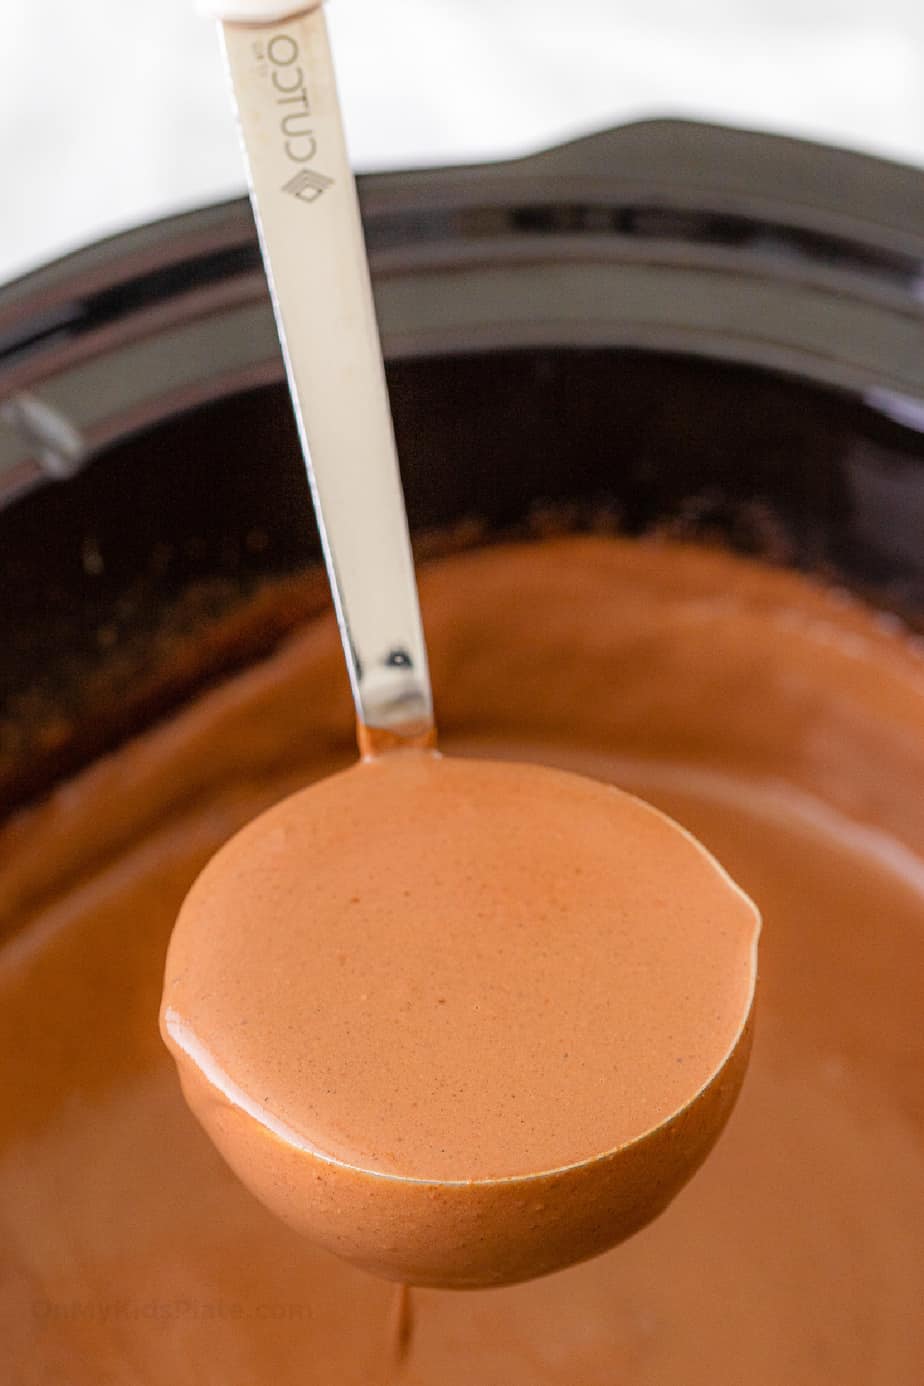 A ladle of creamy hot chocolate being lifted from a slow cooker